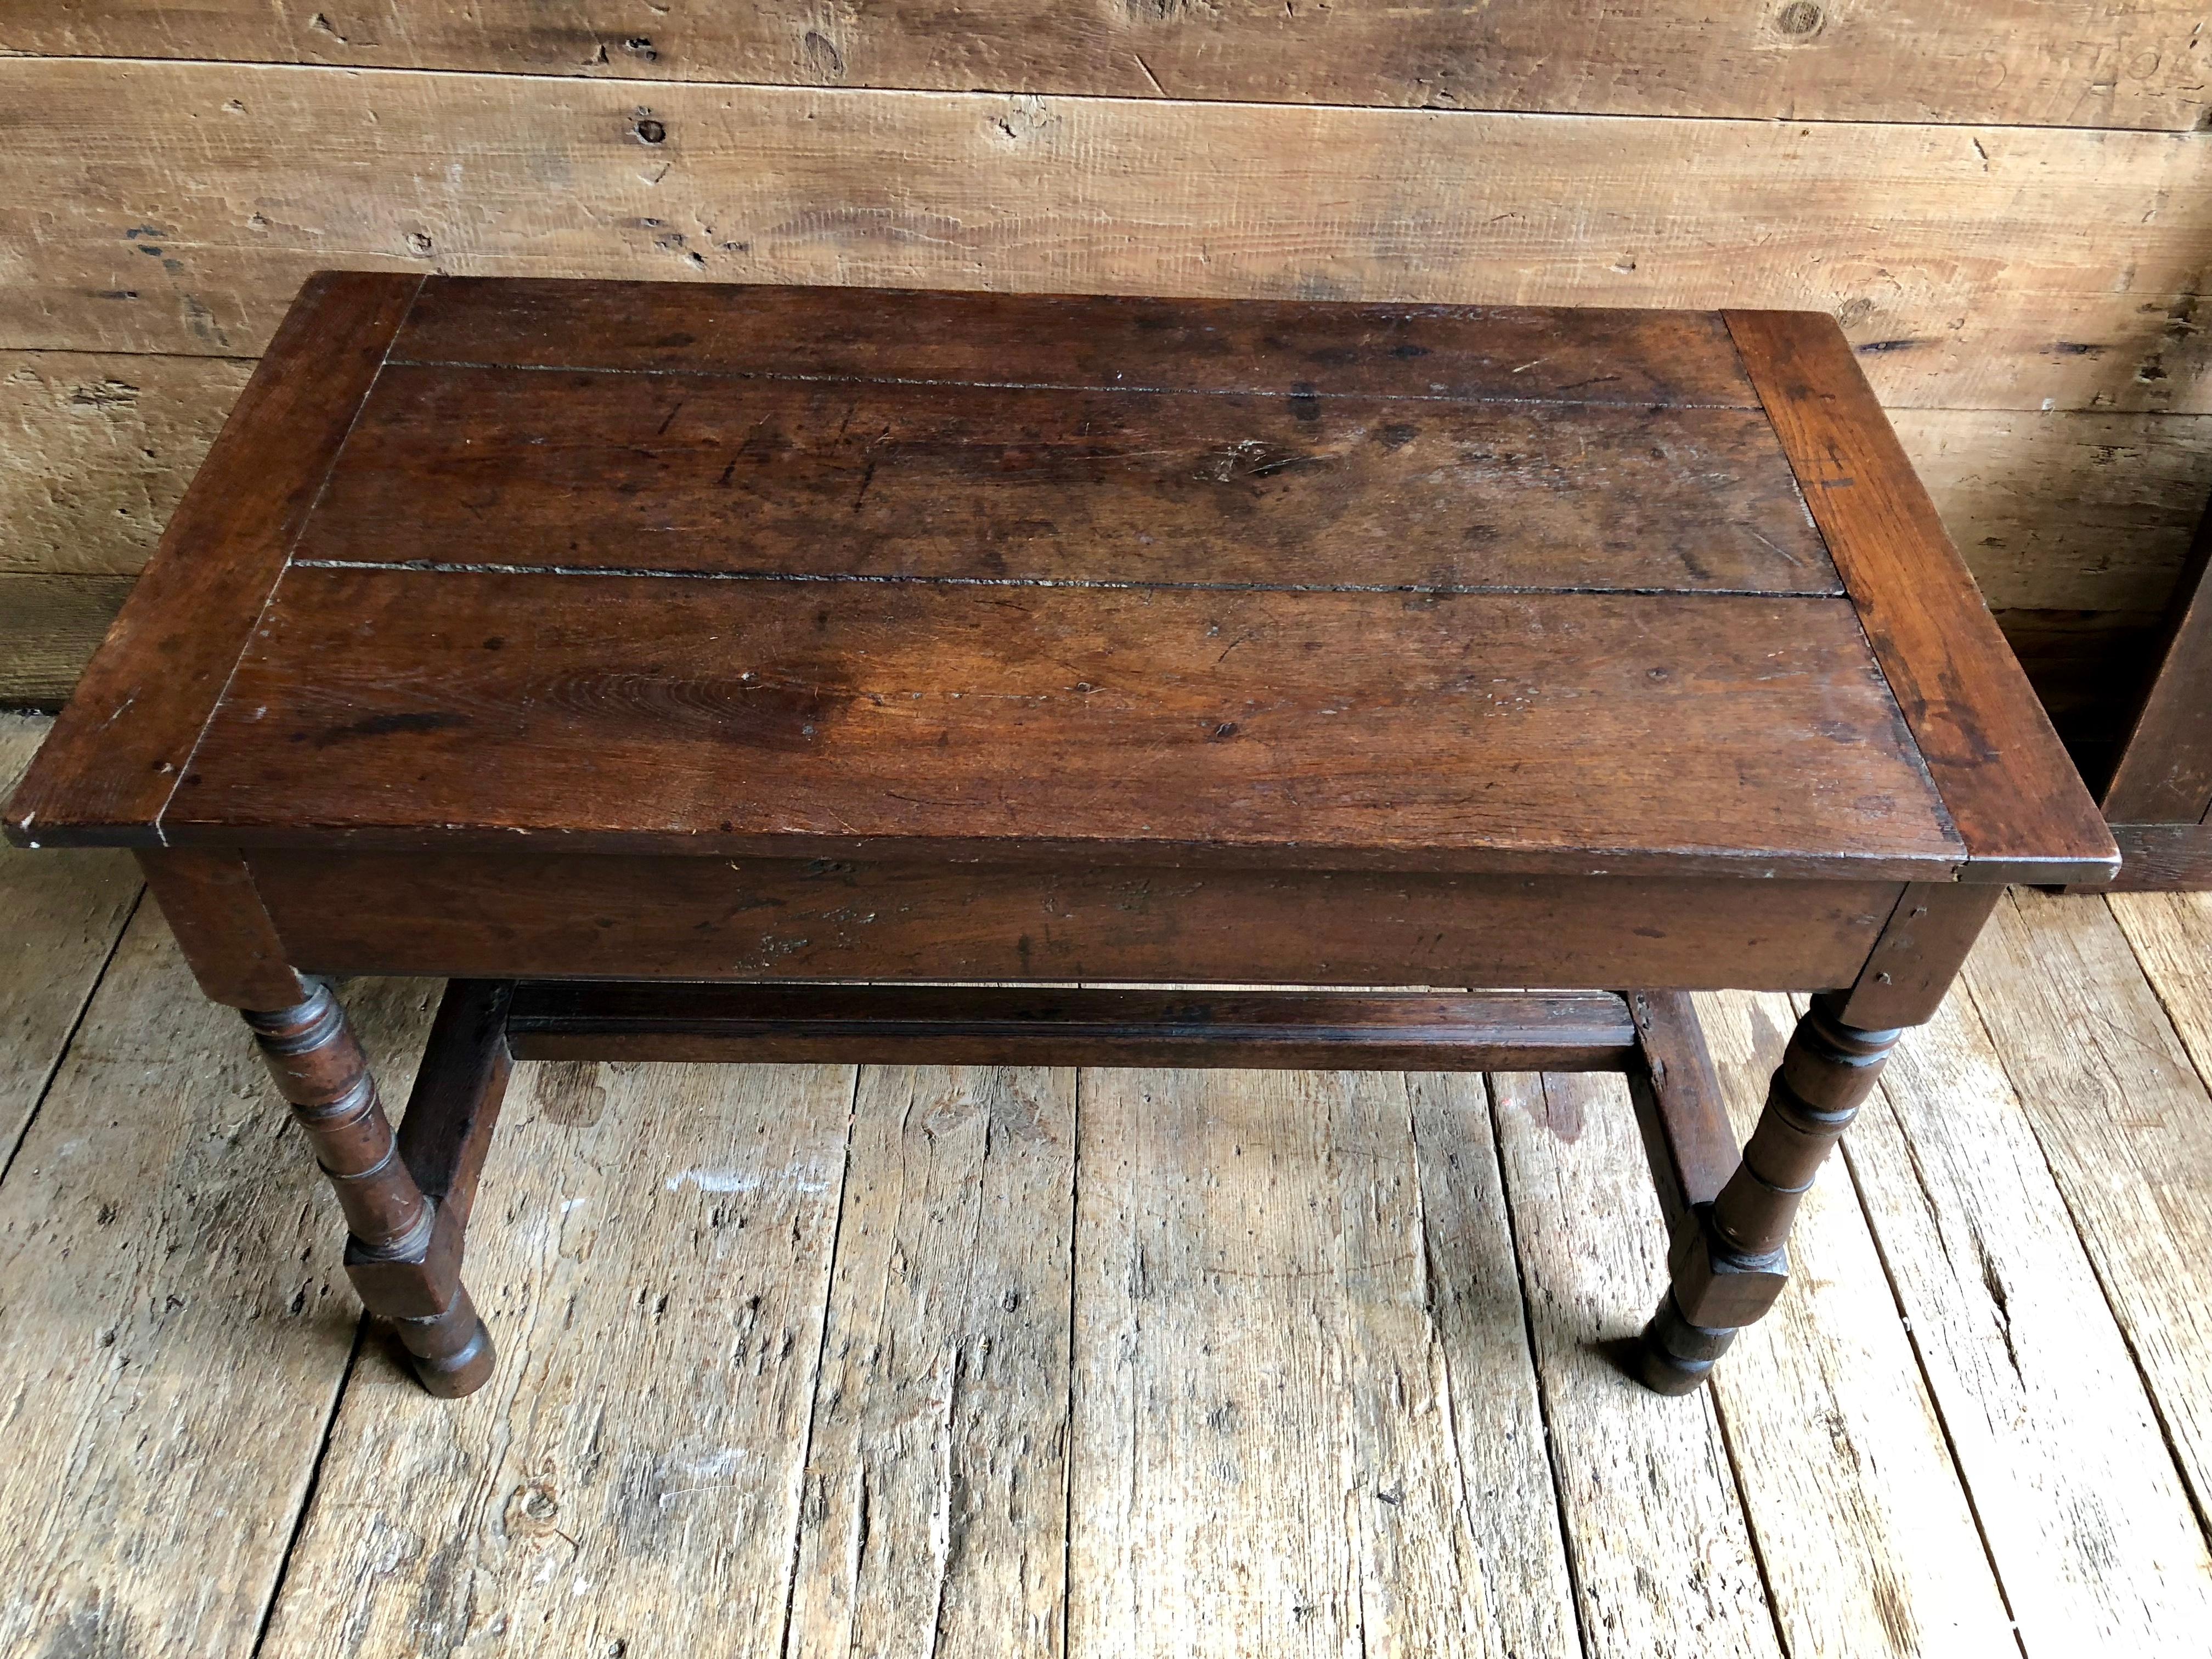 Rustic Oak Refectory Table with Extensions, 17th Century